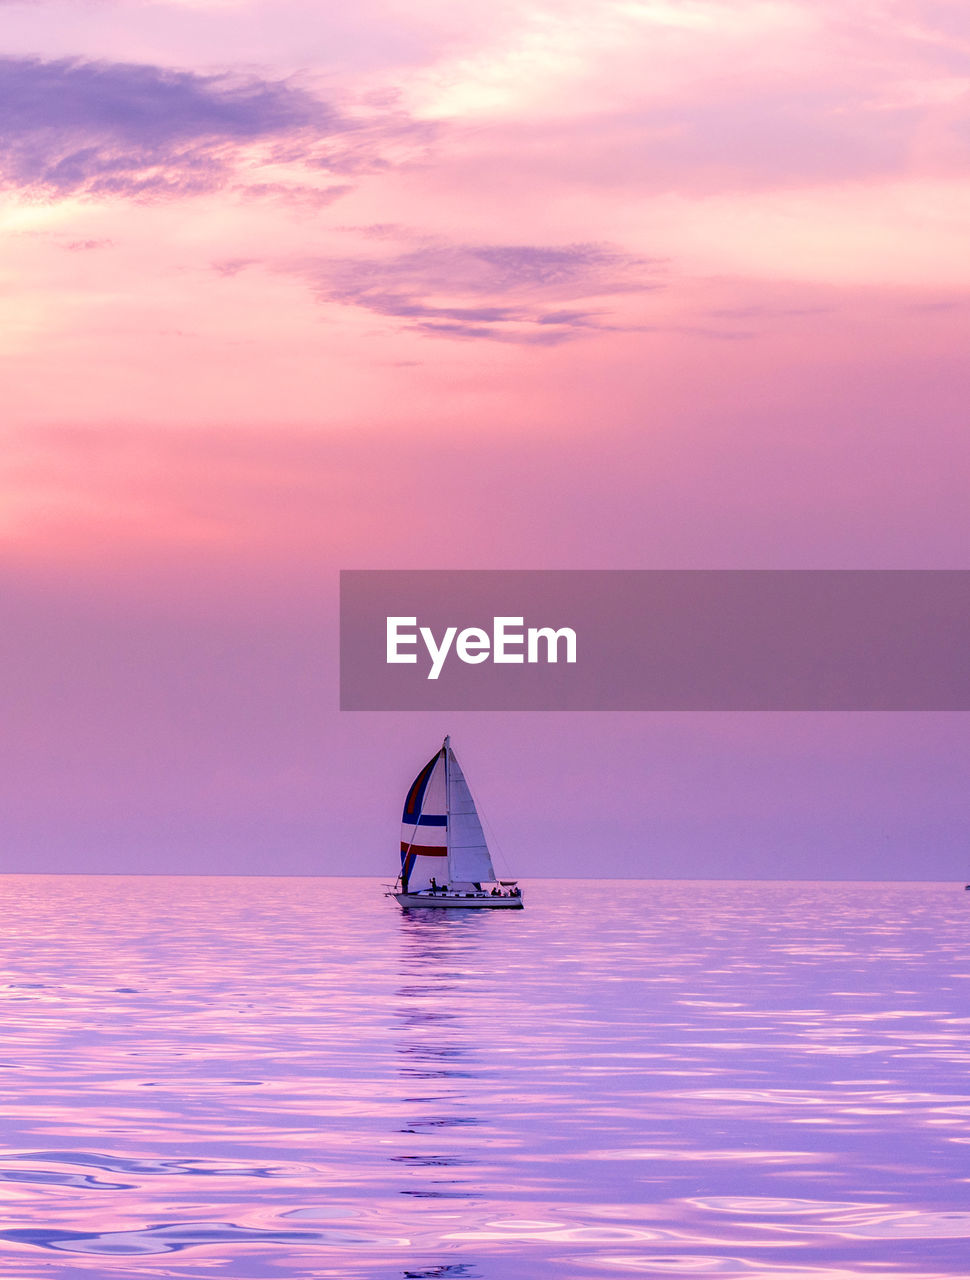 A lone sail boat floats on a still lake with a beautiful sunset of purple and pink